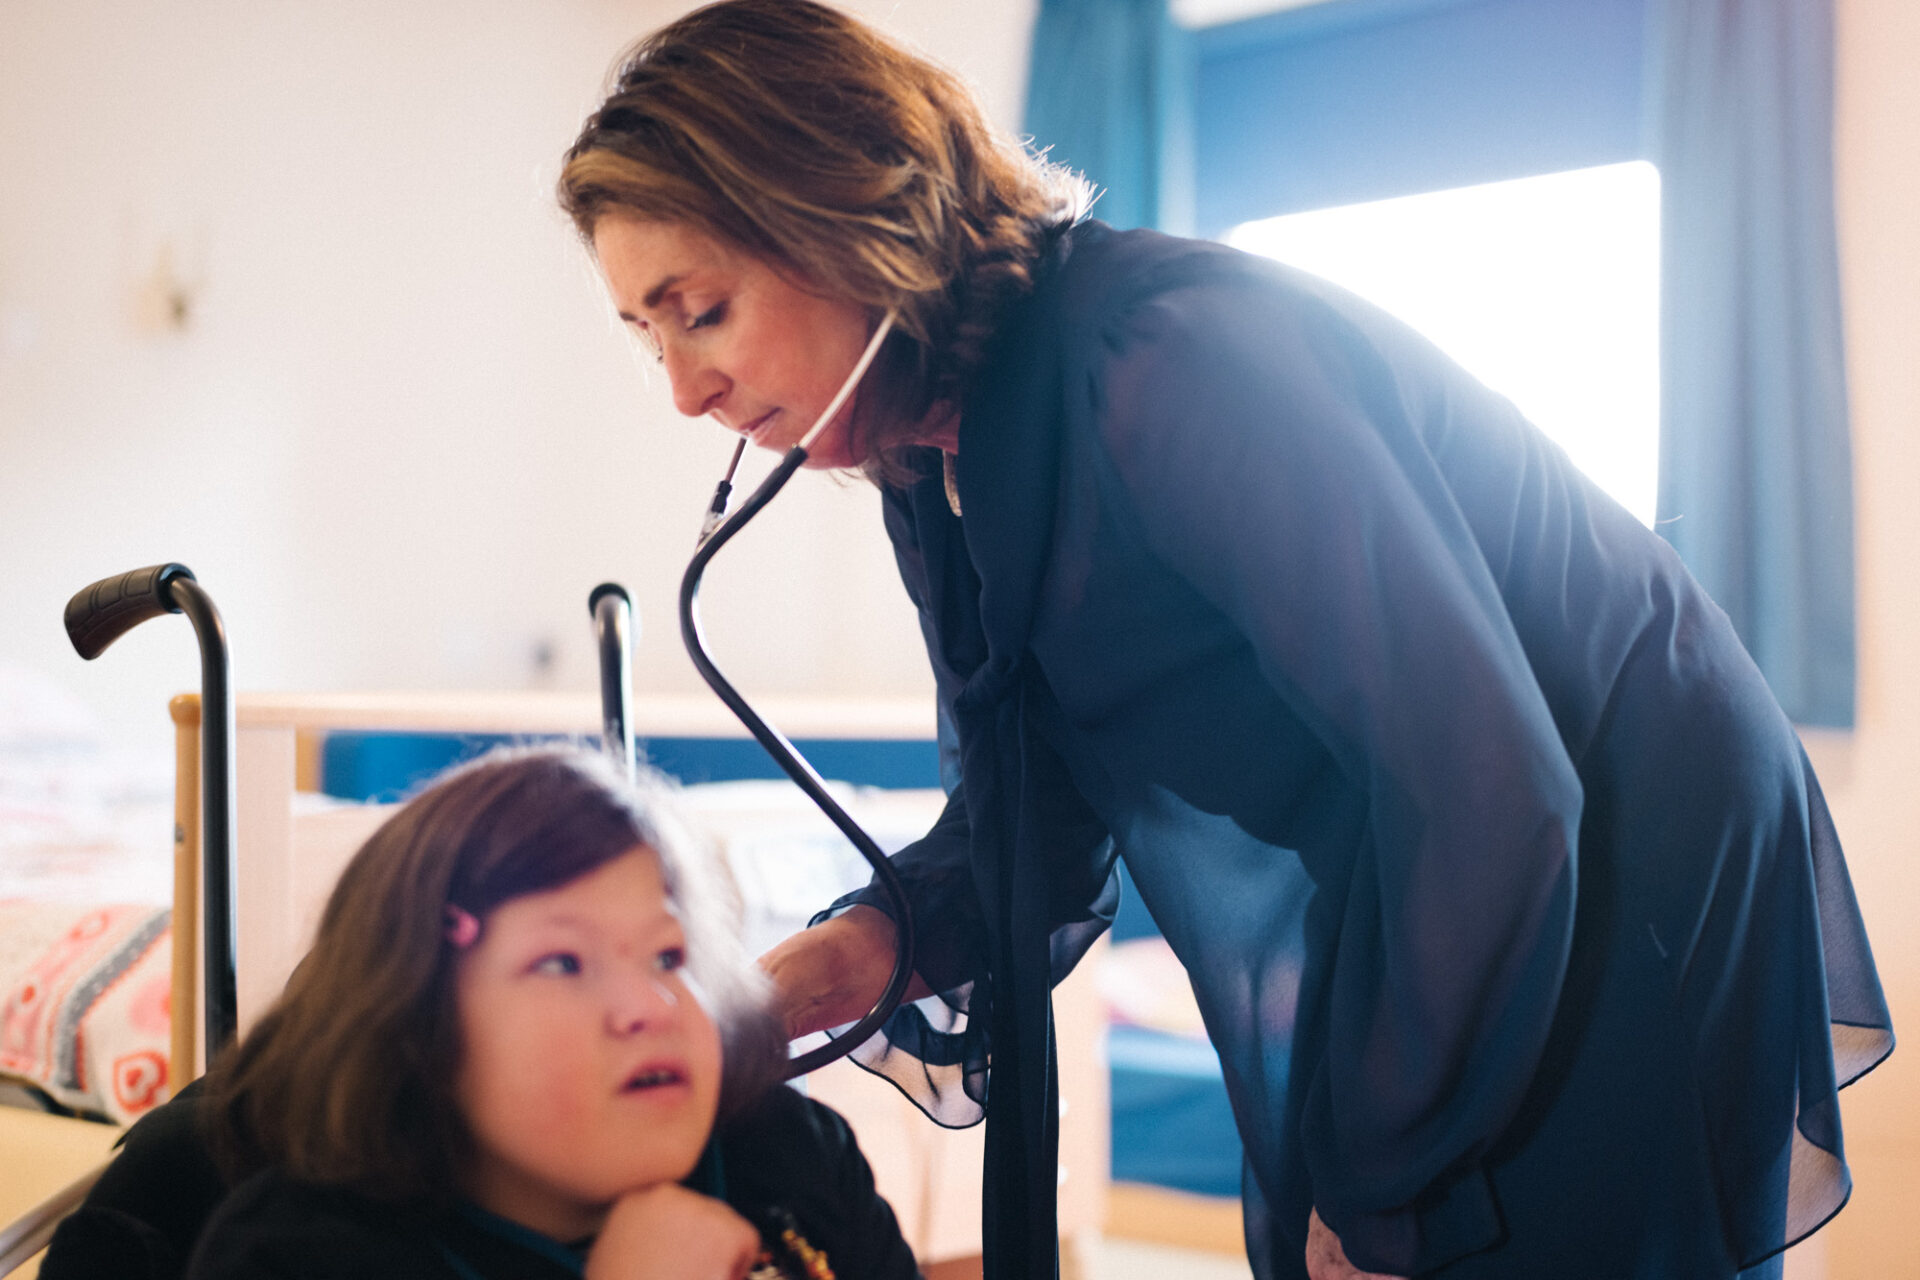 Doctor with stethoscope listening to a child breathing